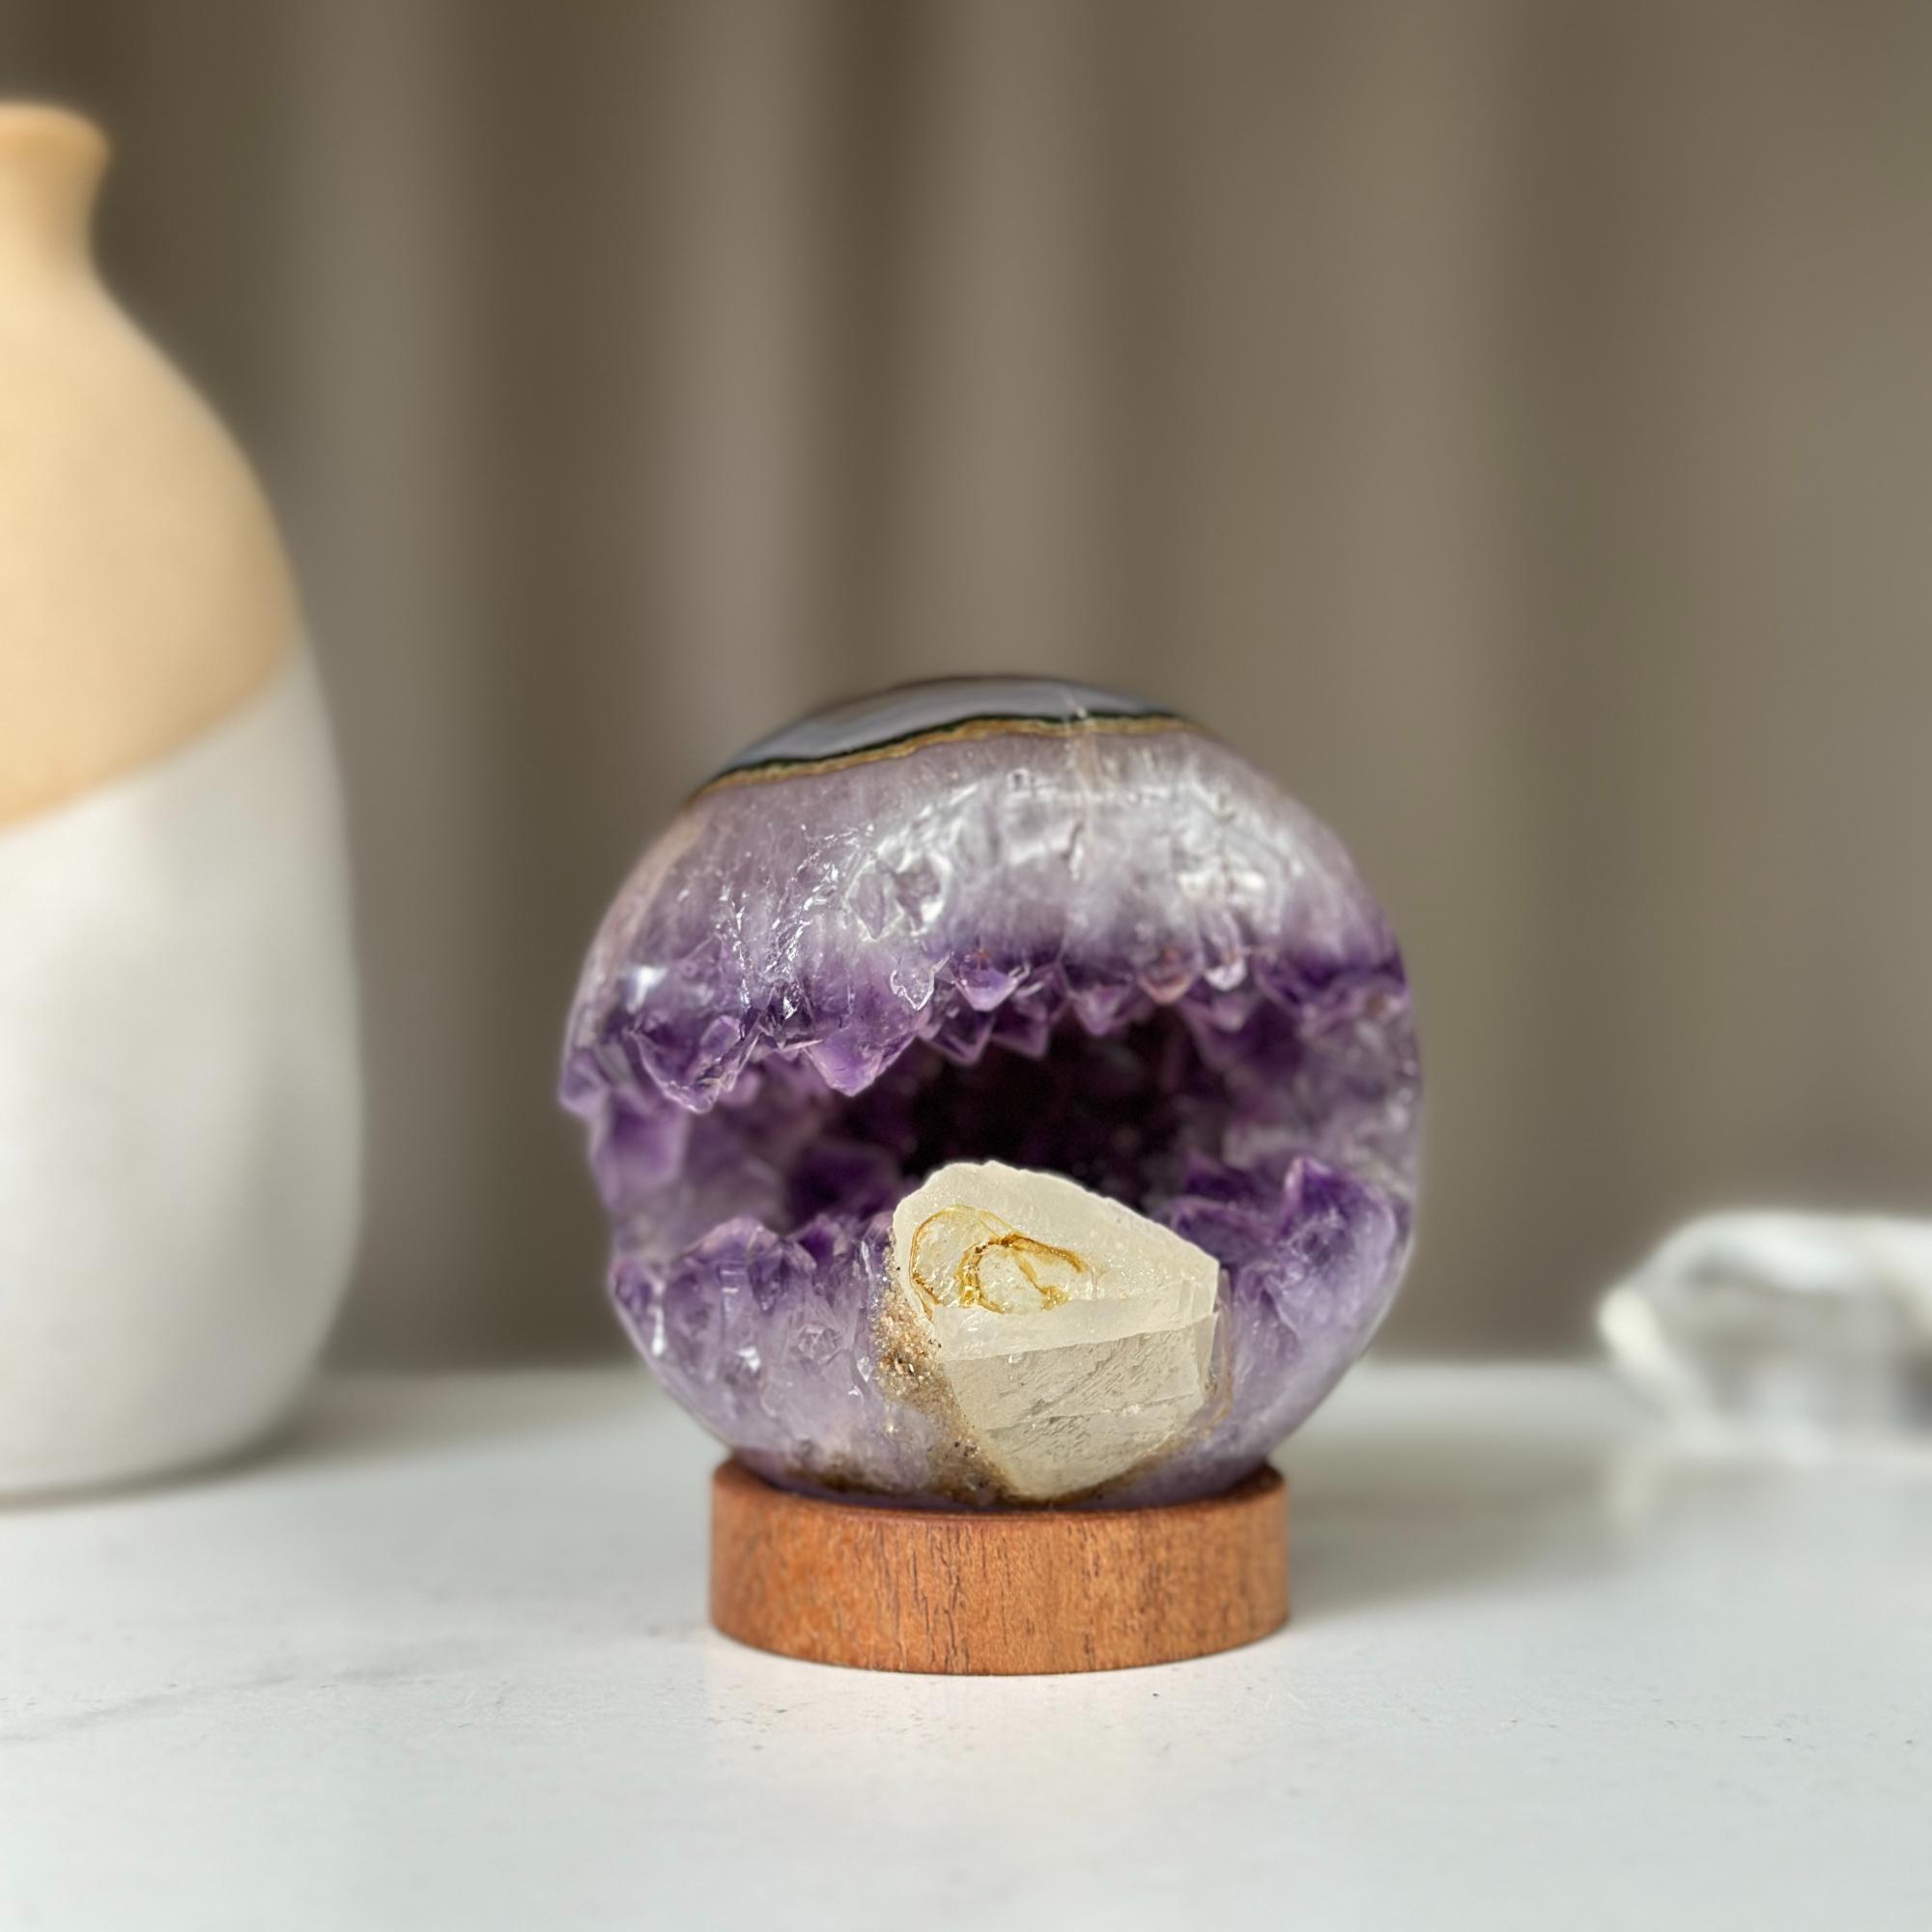 Amethyst sphere with agate layers, Crystal Ball 1 Lb, Large Agate sphere, Top quality crystal ball